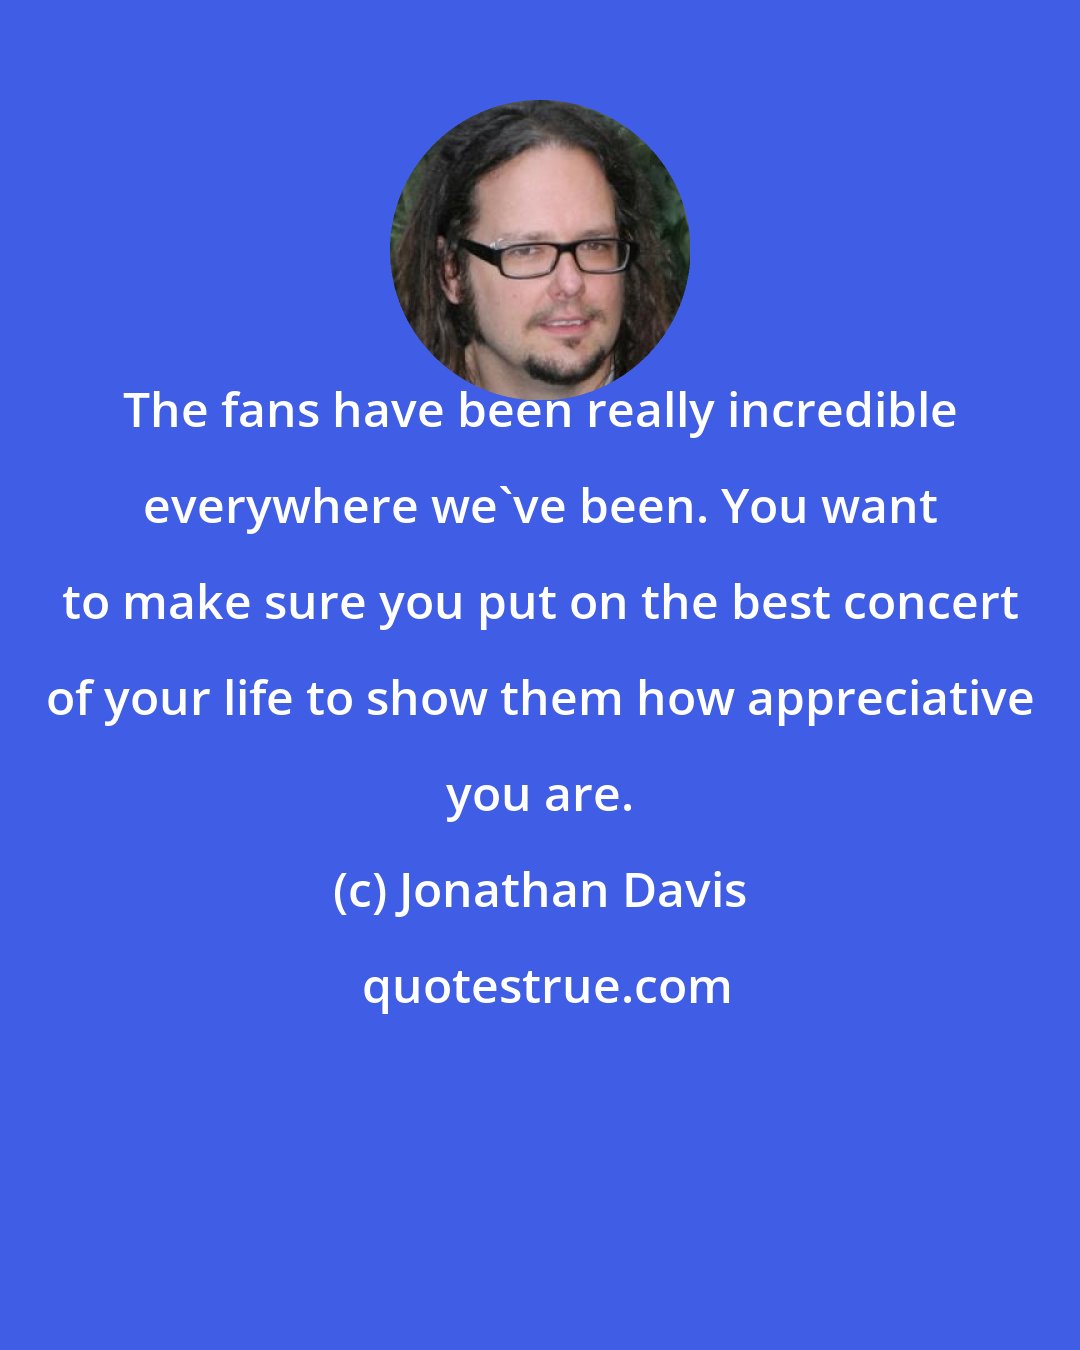 Jonathan Davis: The fans have been really incredible everywhere we've been. You want to make sure you put on the best concert of your life to show them how appreciative you are.